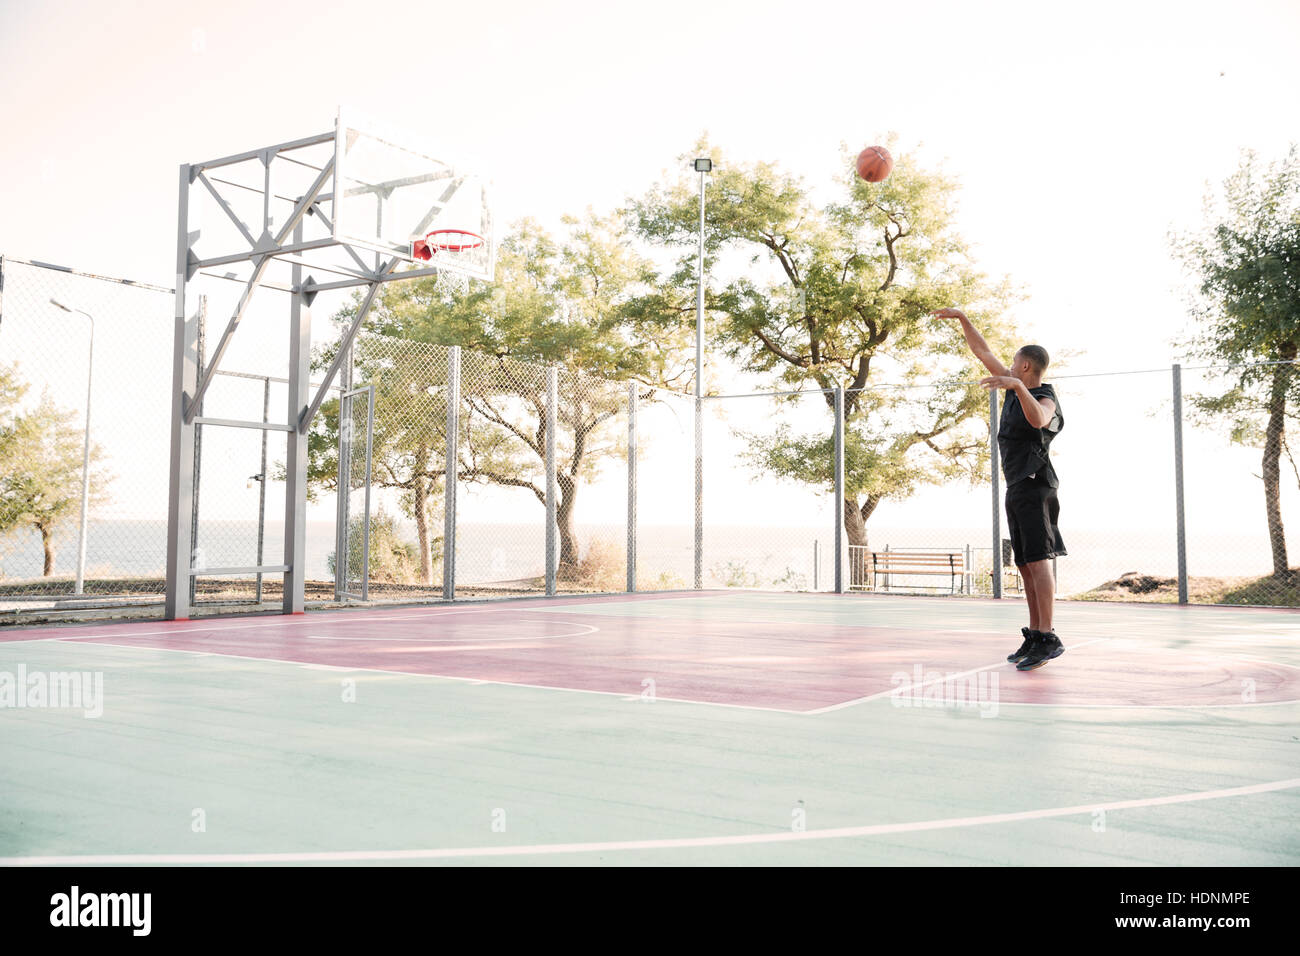 Picture of young basketball player practicing in the street with trees on background Stock Photo